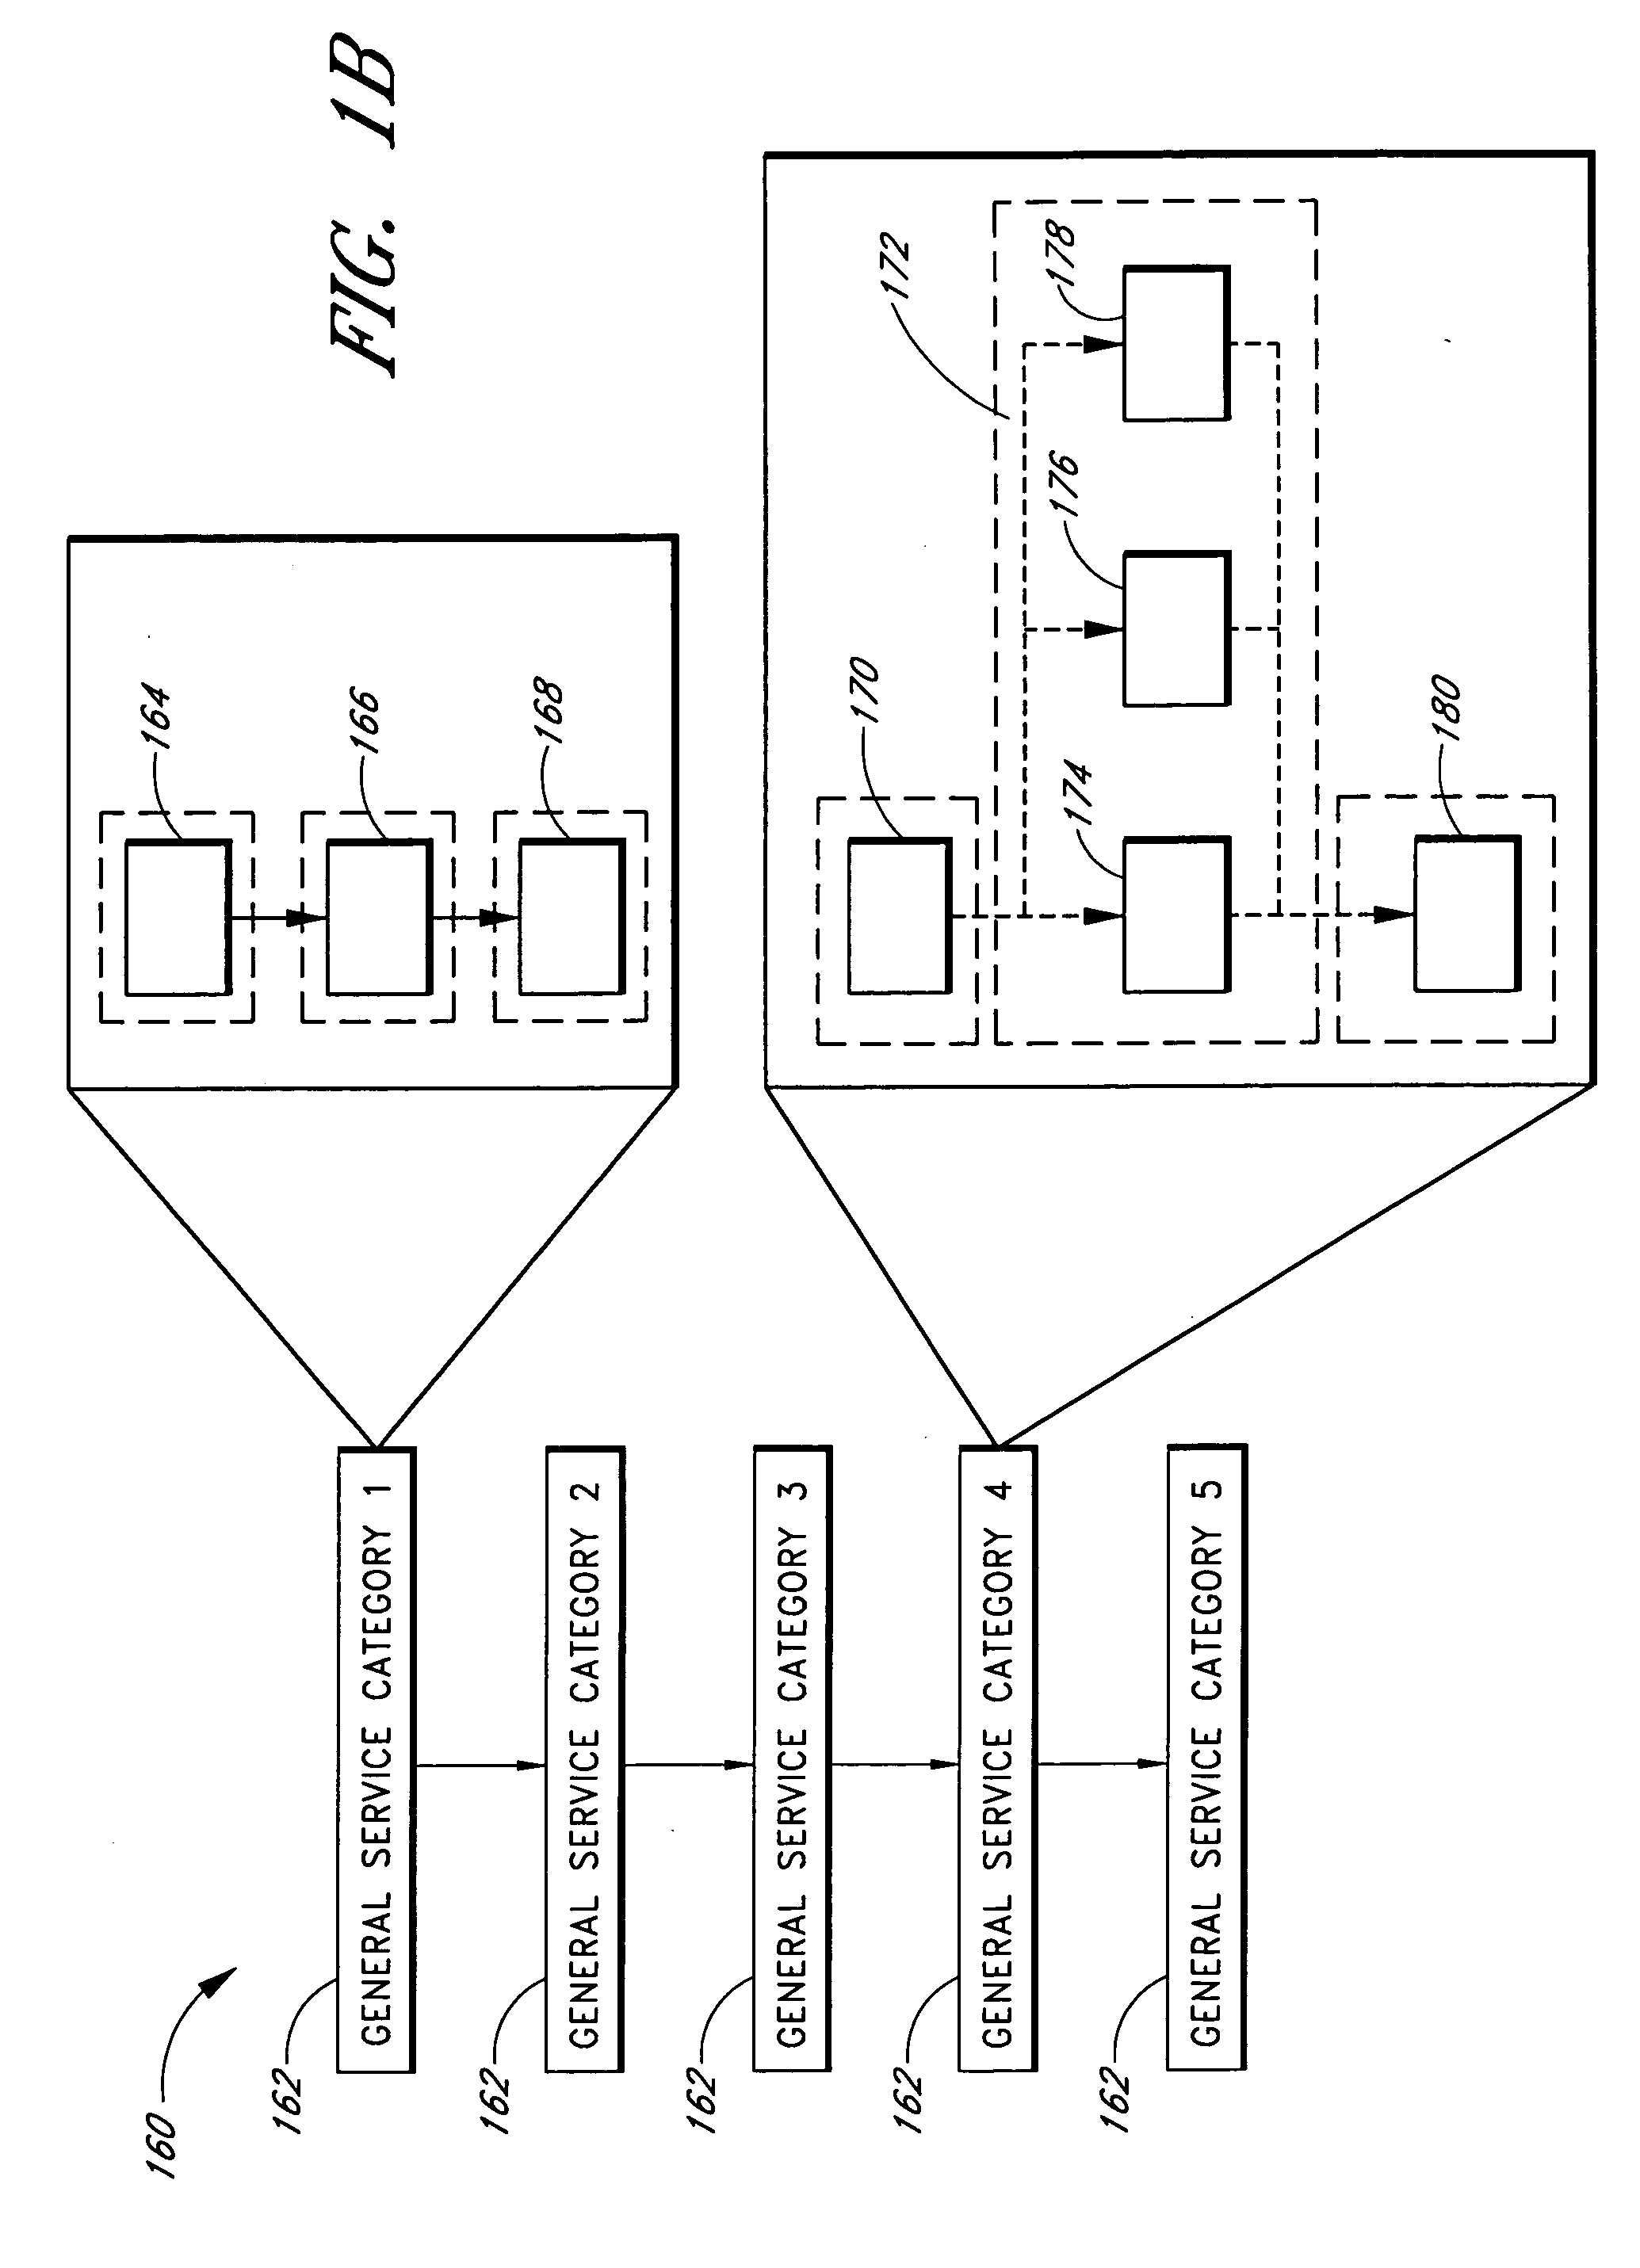 System and method of tracking objects being serviced